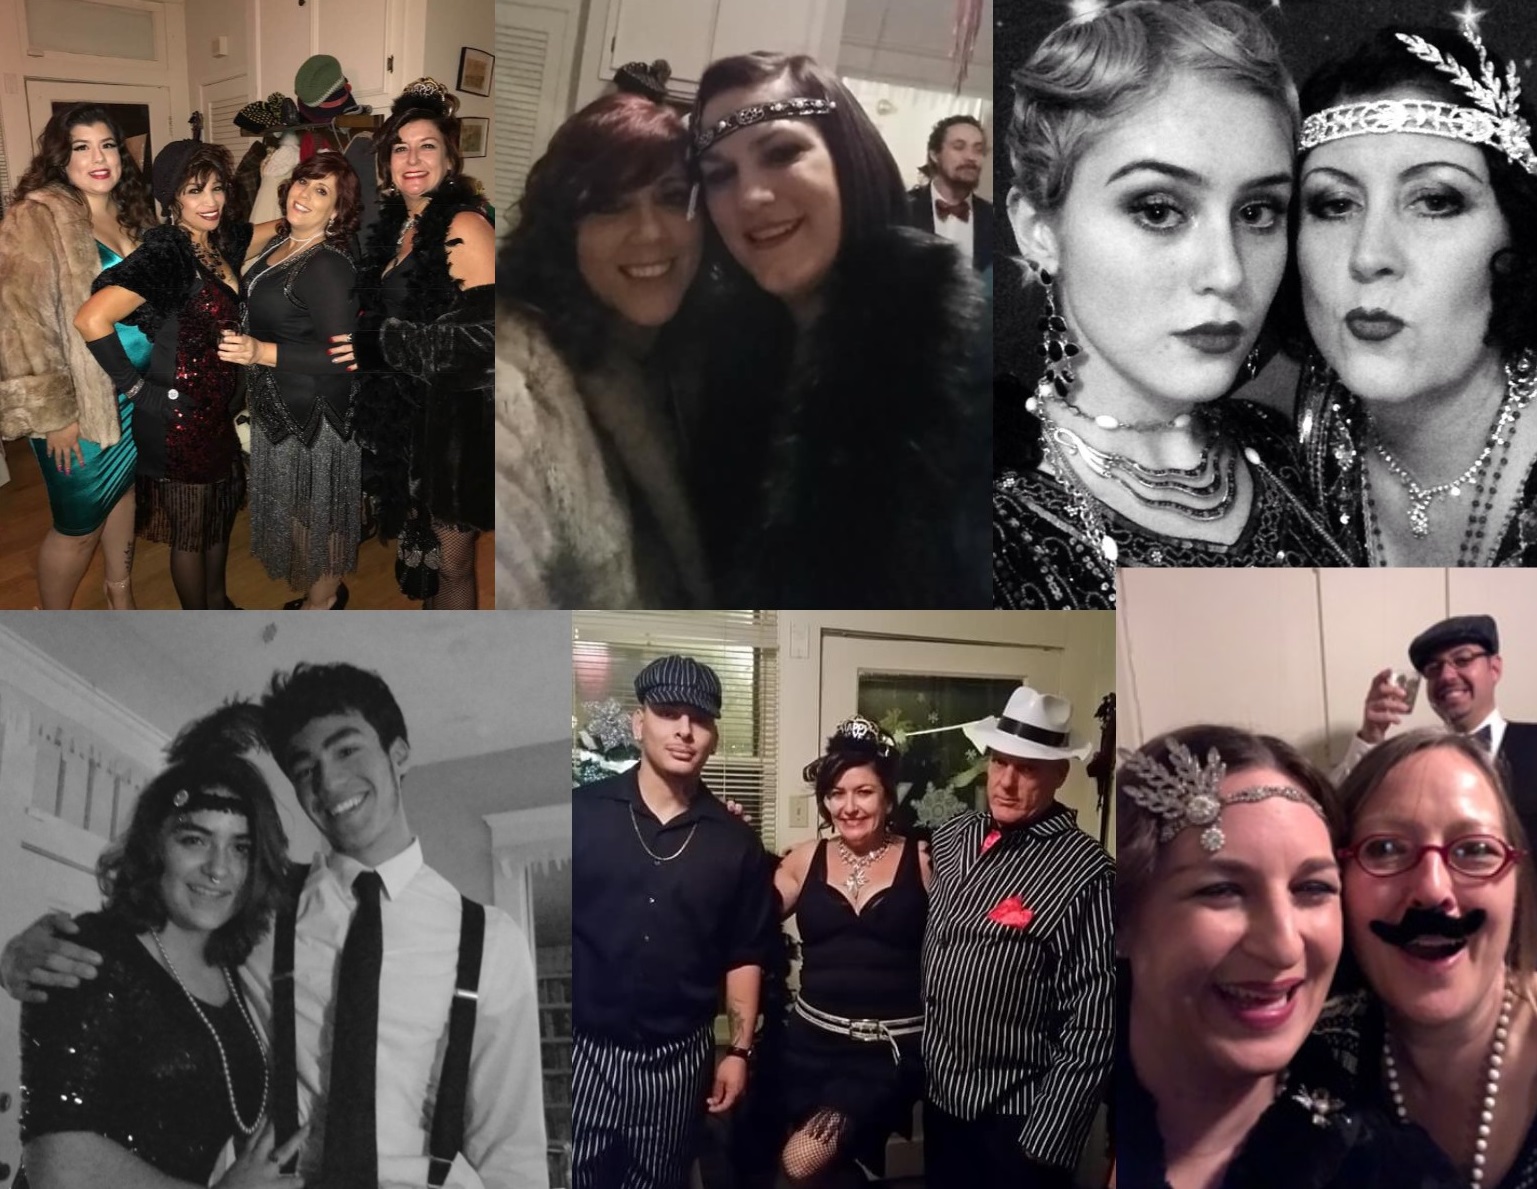 1920s New years Eve party 2018 costumes collage